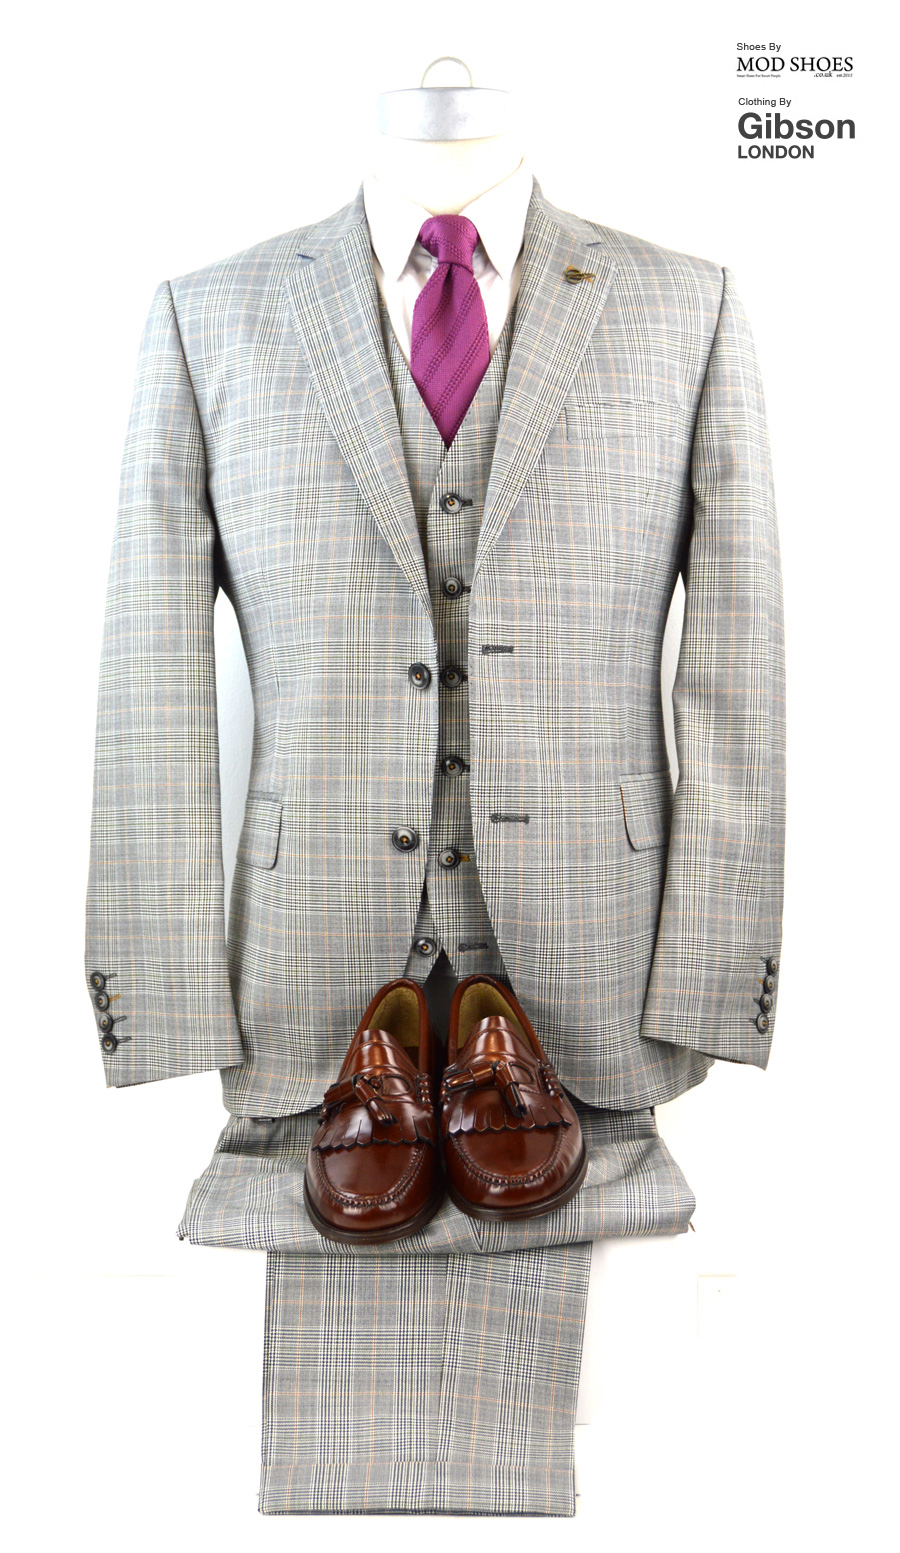 modshoes-prince-of-wales-suit-from-gibson-clothing